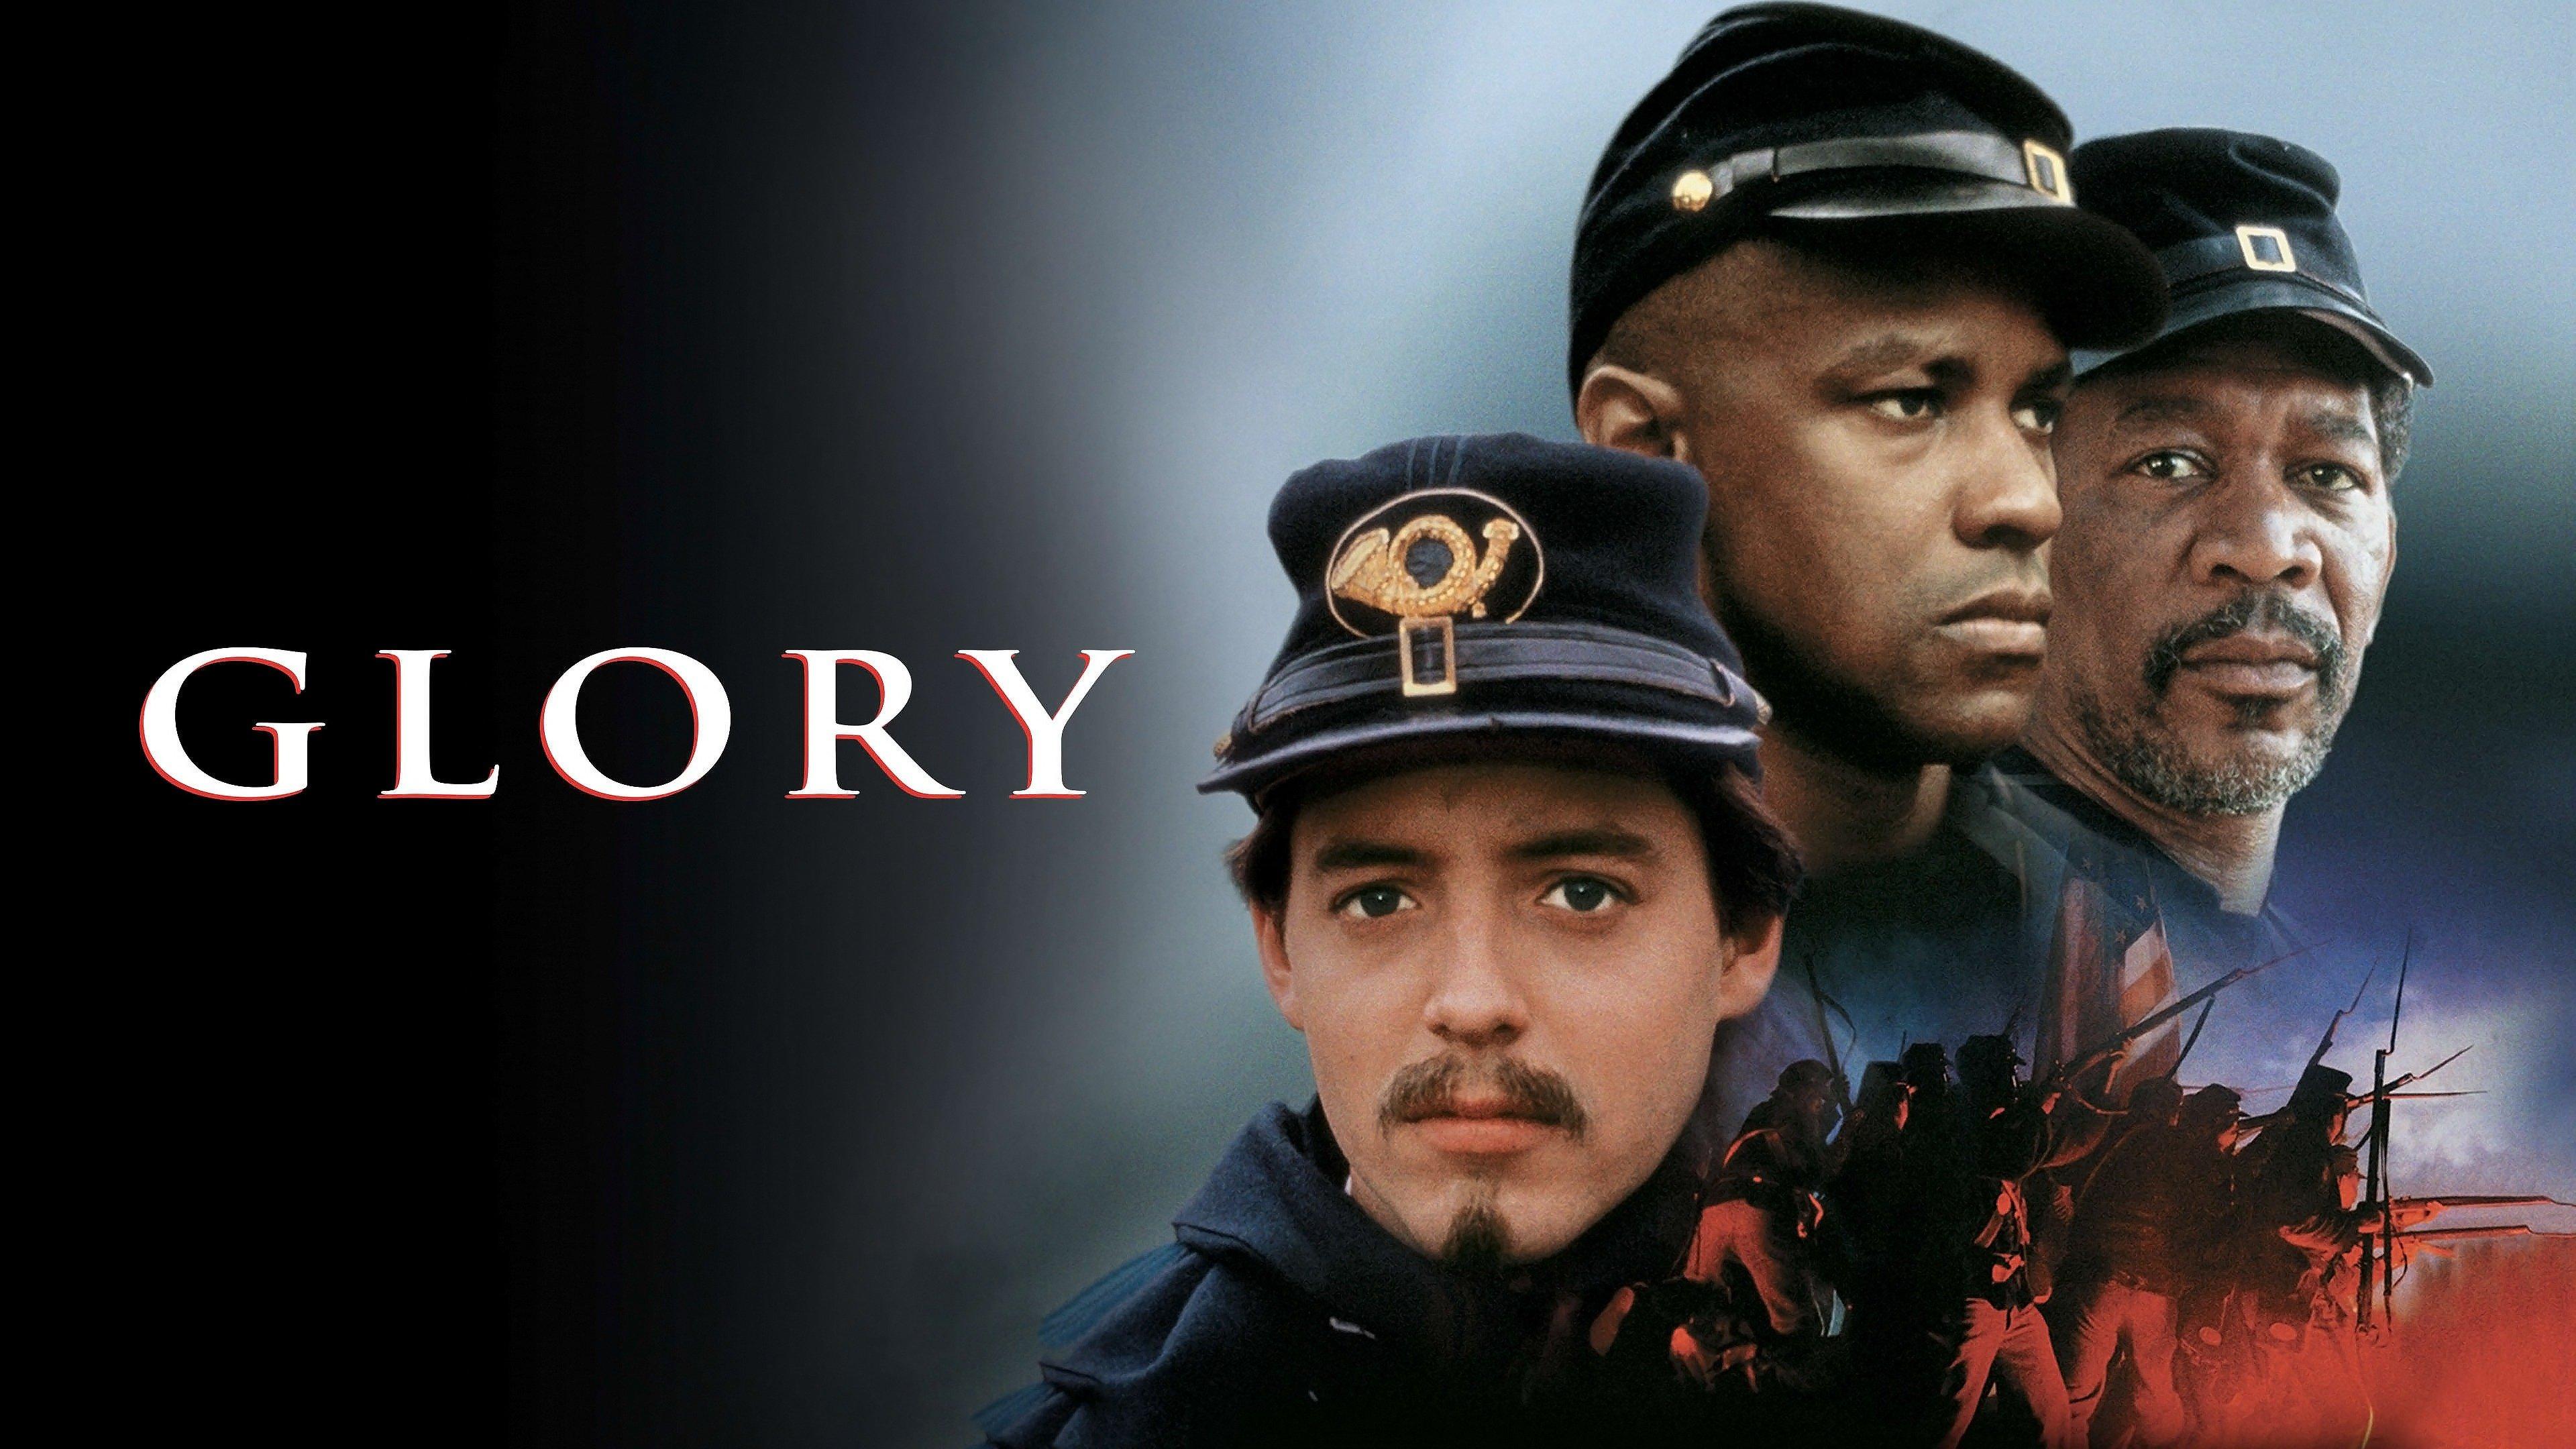 Watch Glory Streaming Online on Philo (Free Trial)